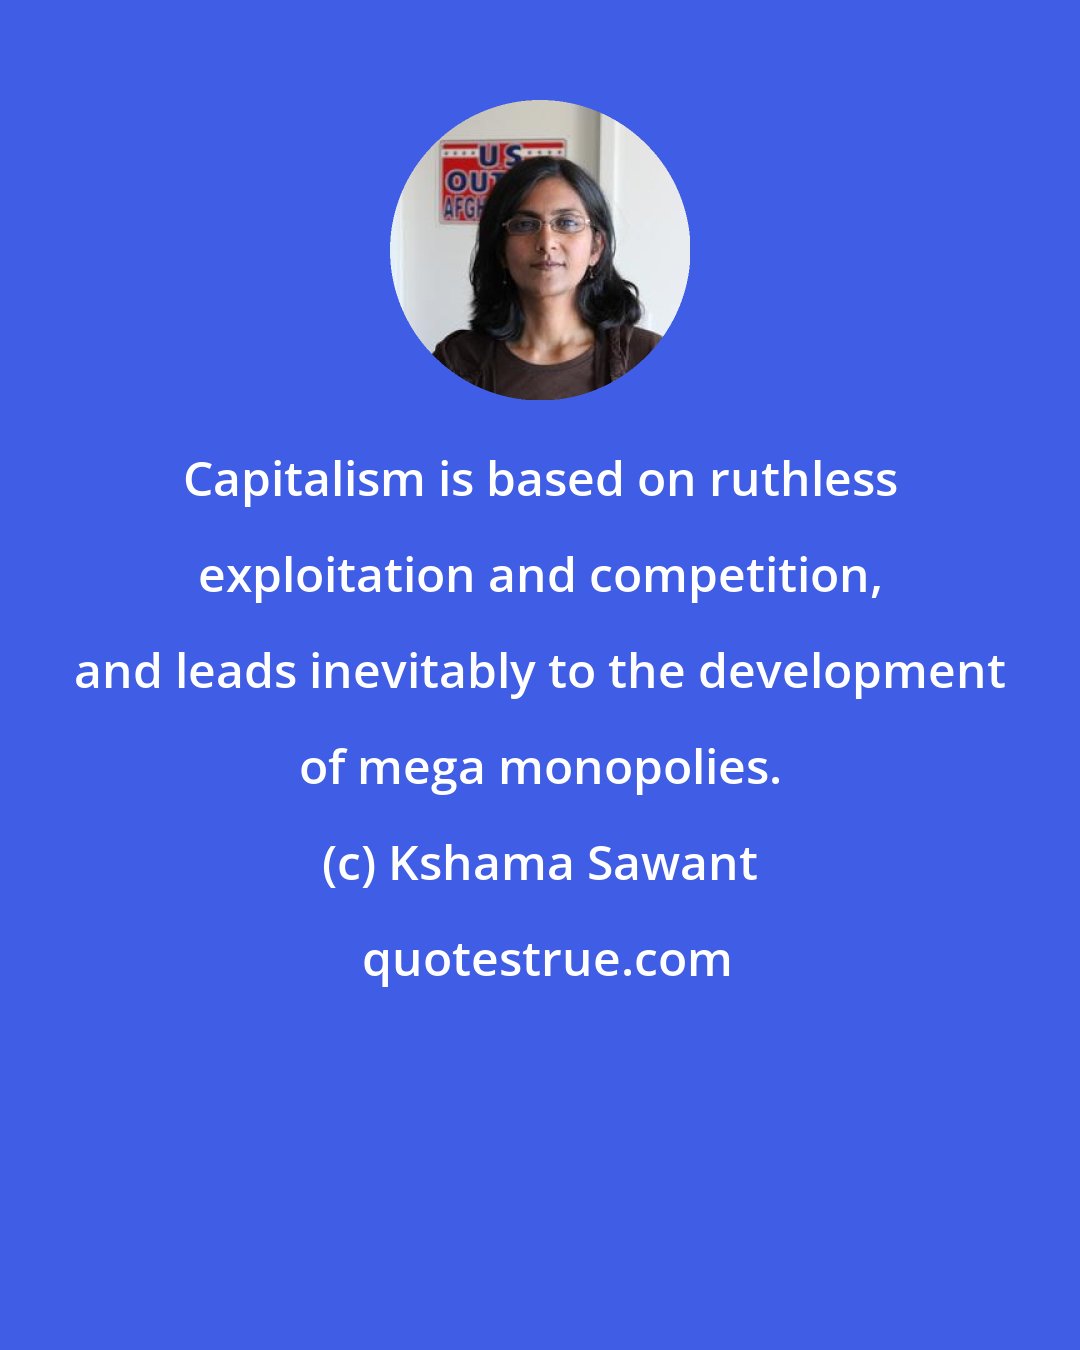 Kshama Sawant: Capitalism is based on ruthless exploitation and competition, and leads inevitably to the development of mega monopolies.